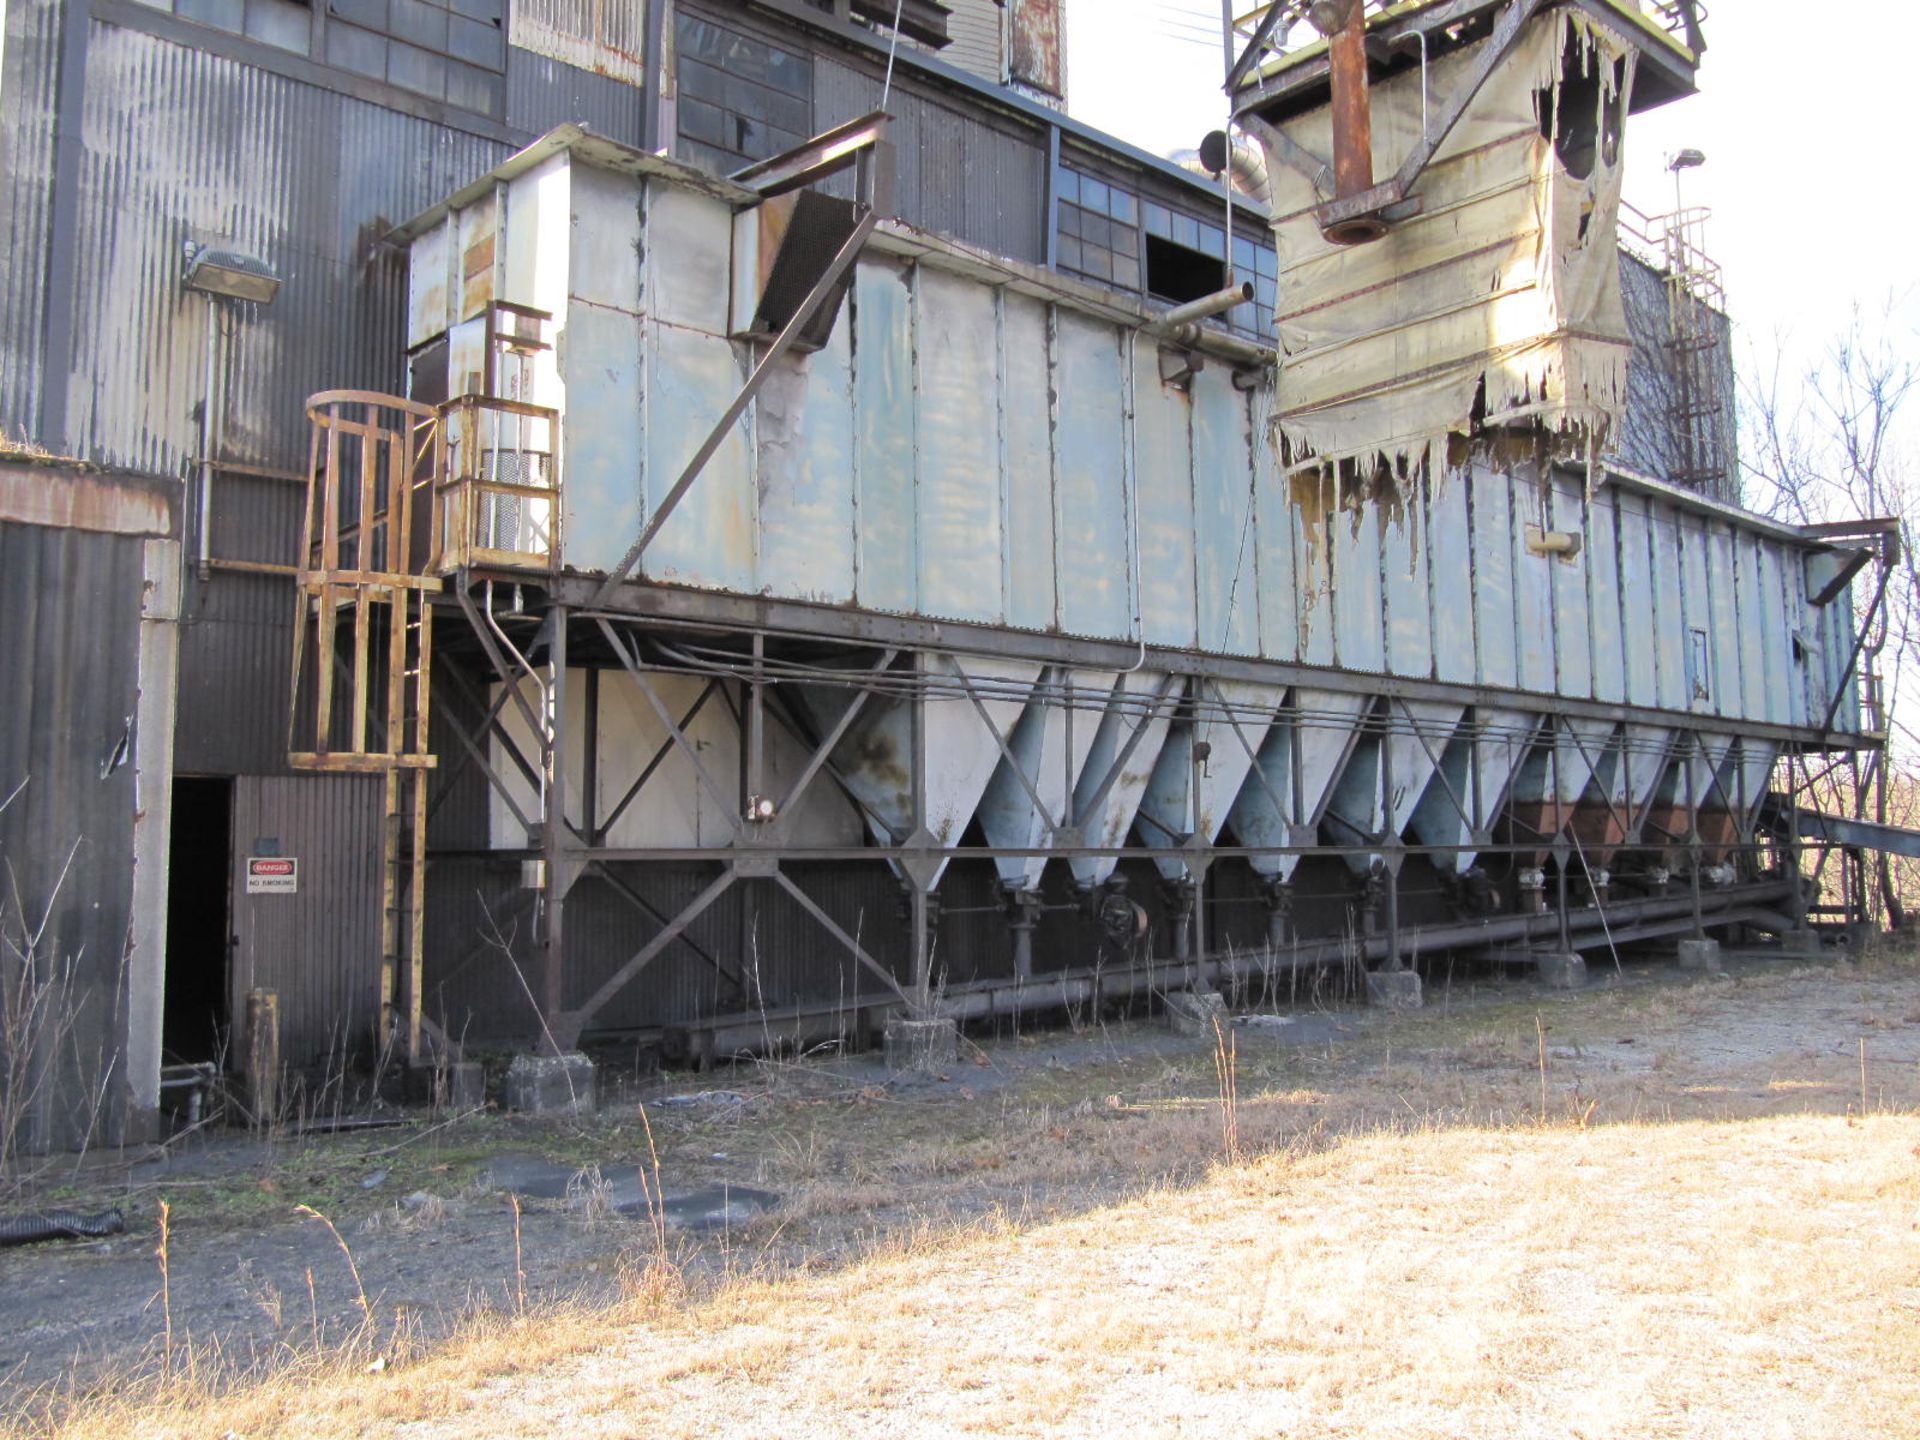 Lot including vibratory screen, assorted steel and stainless duct work, bucket elevator (not